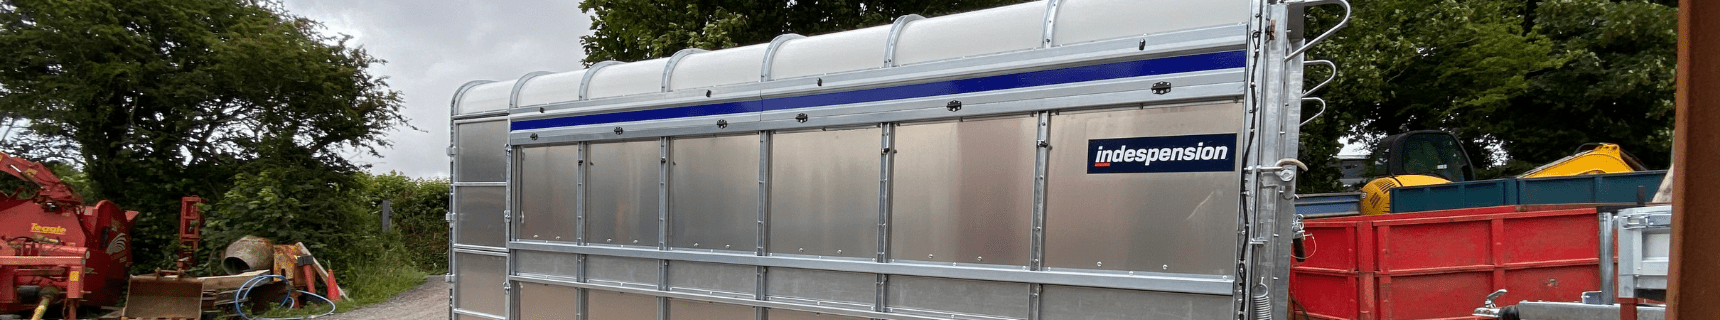 Indespension 10’x5’6” Plant Trailer (3500kgs) Head Image